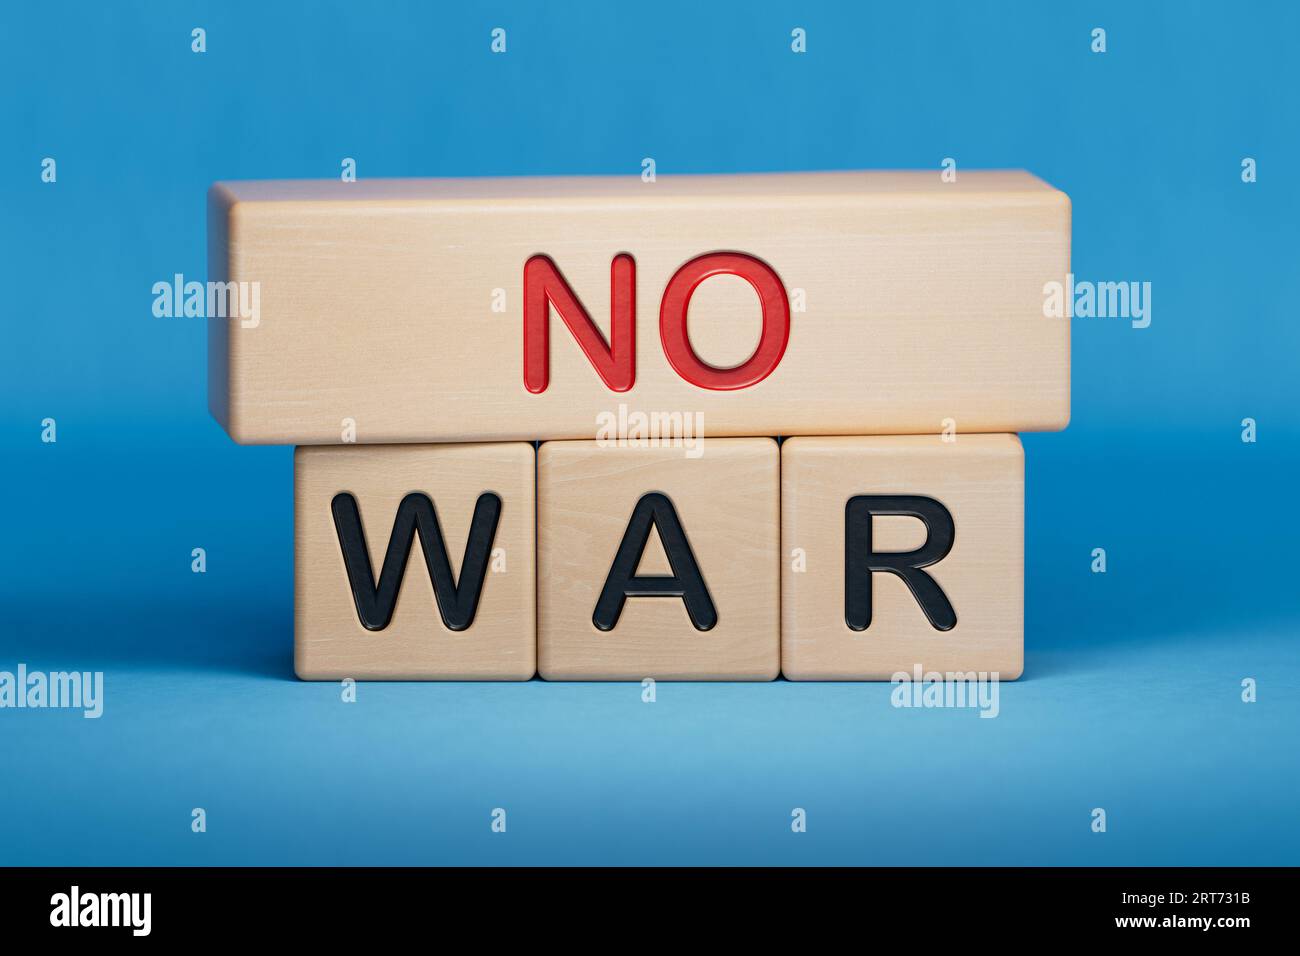 NO WAR symbol. Wooden blocks with words 'NO WAR'. wooden cubes with the inscription NO WAR.3D rendering on blue background. Wooden cube blocks. Stock Photo